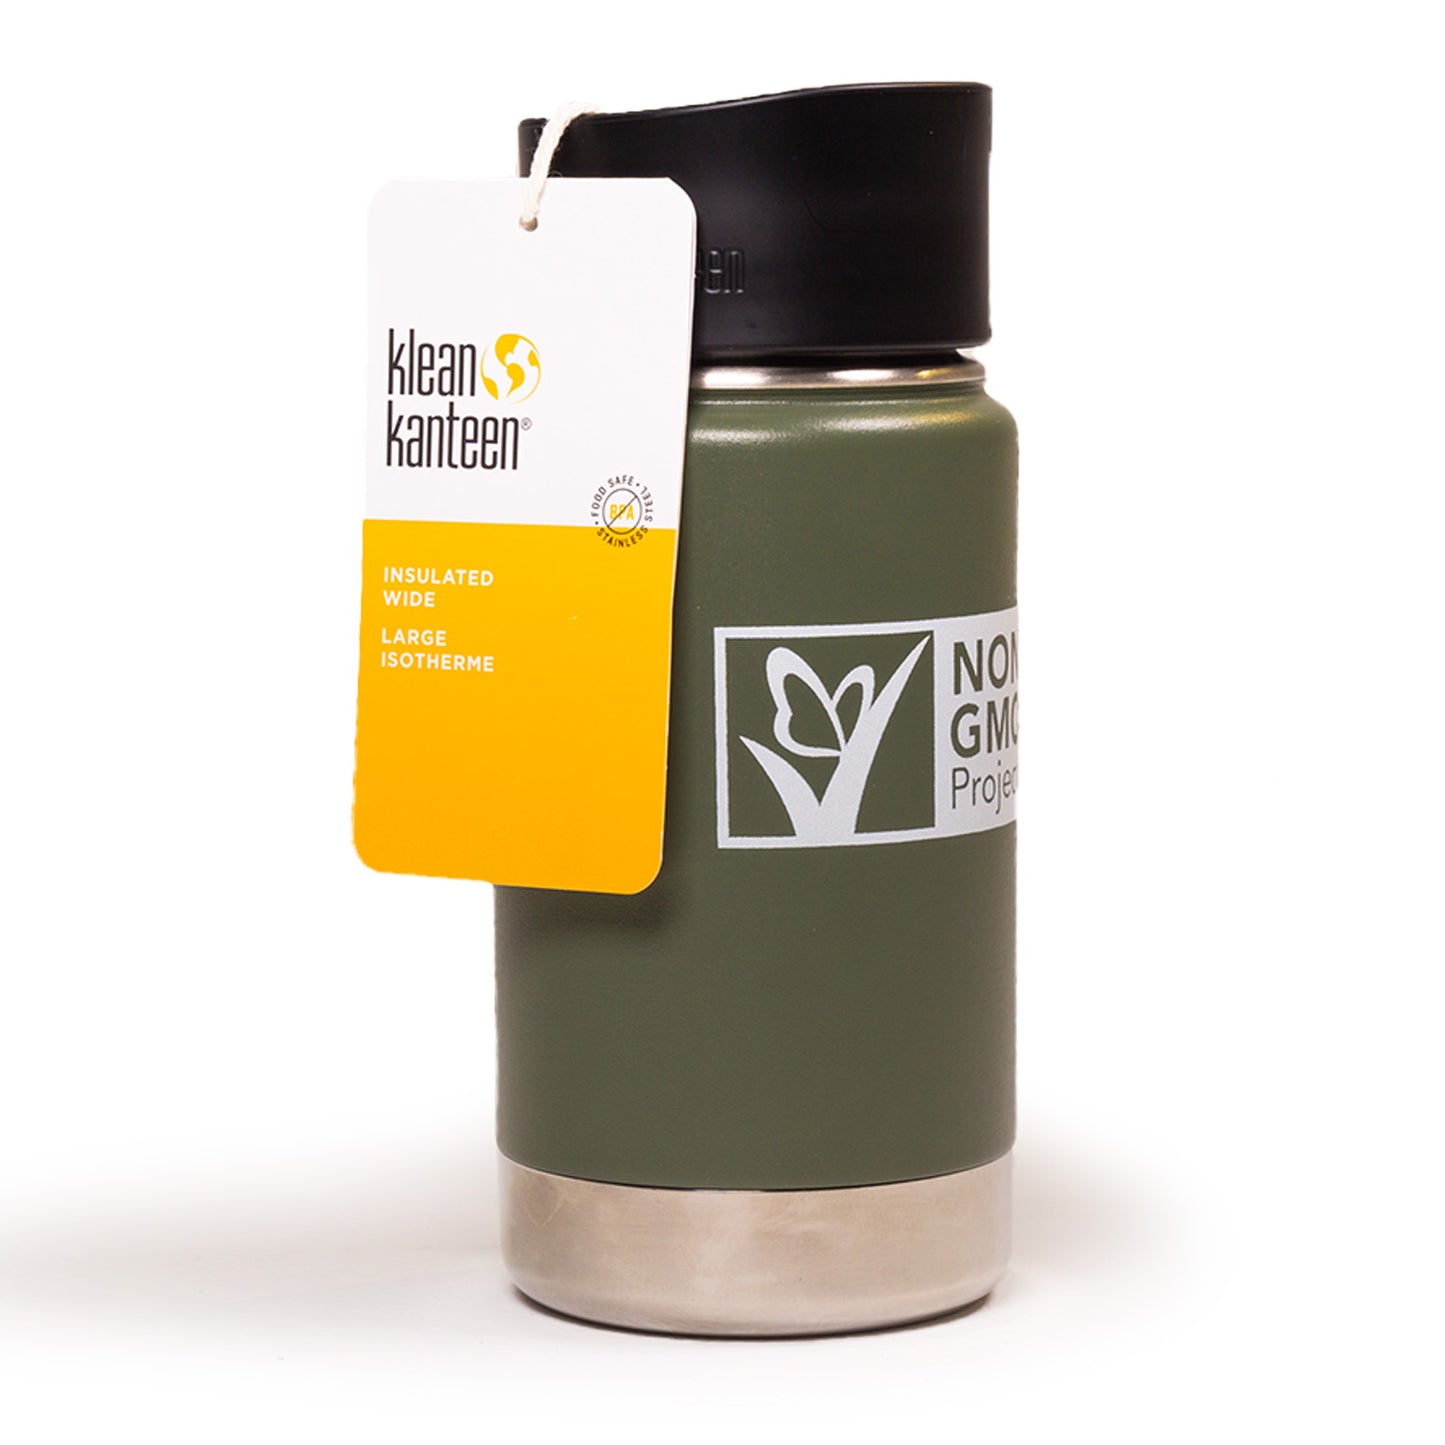 Another side of Non-GMO Project branded Klean Kanteen 